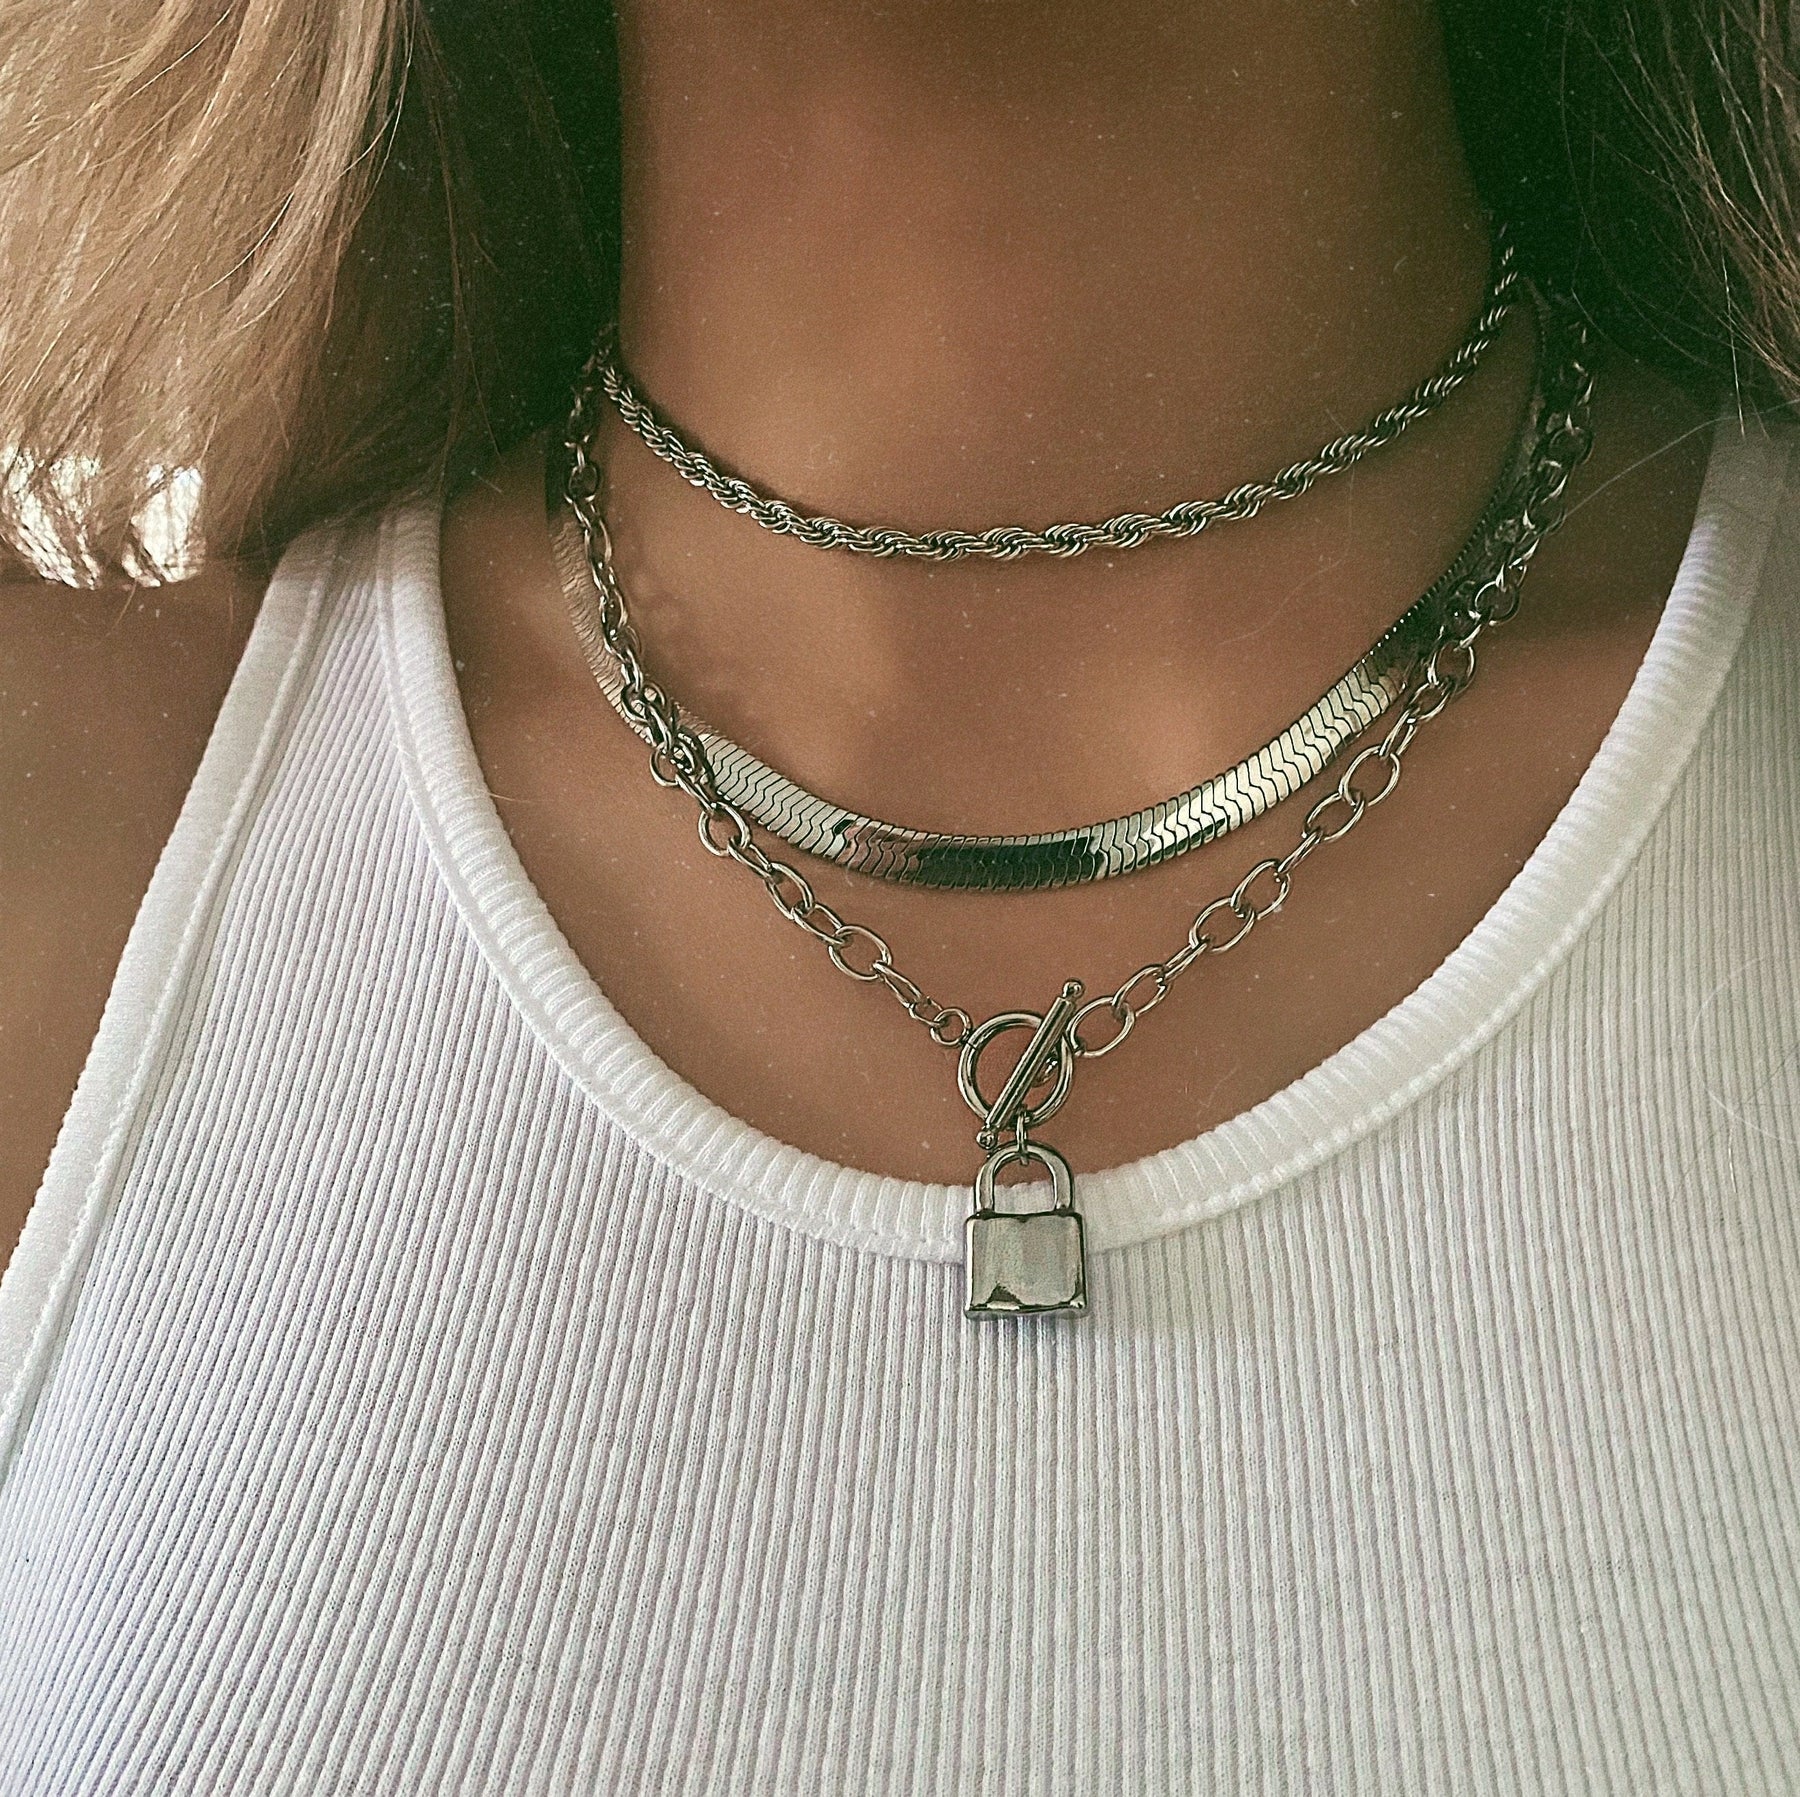 BohoMoon Stainless Steel Reni Rope Choker / Necklace